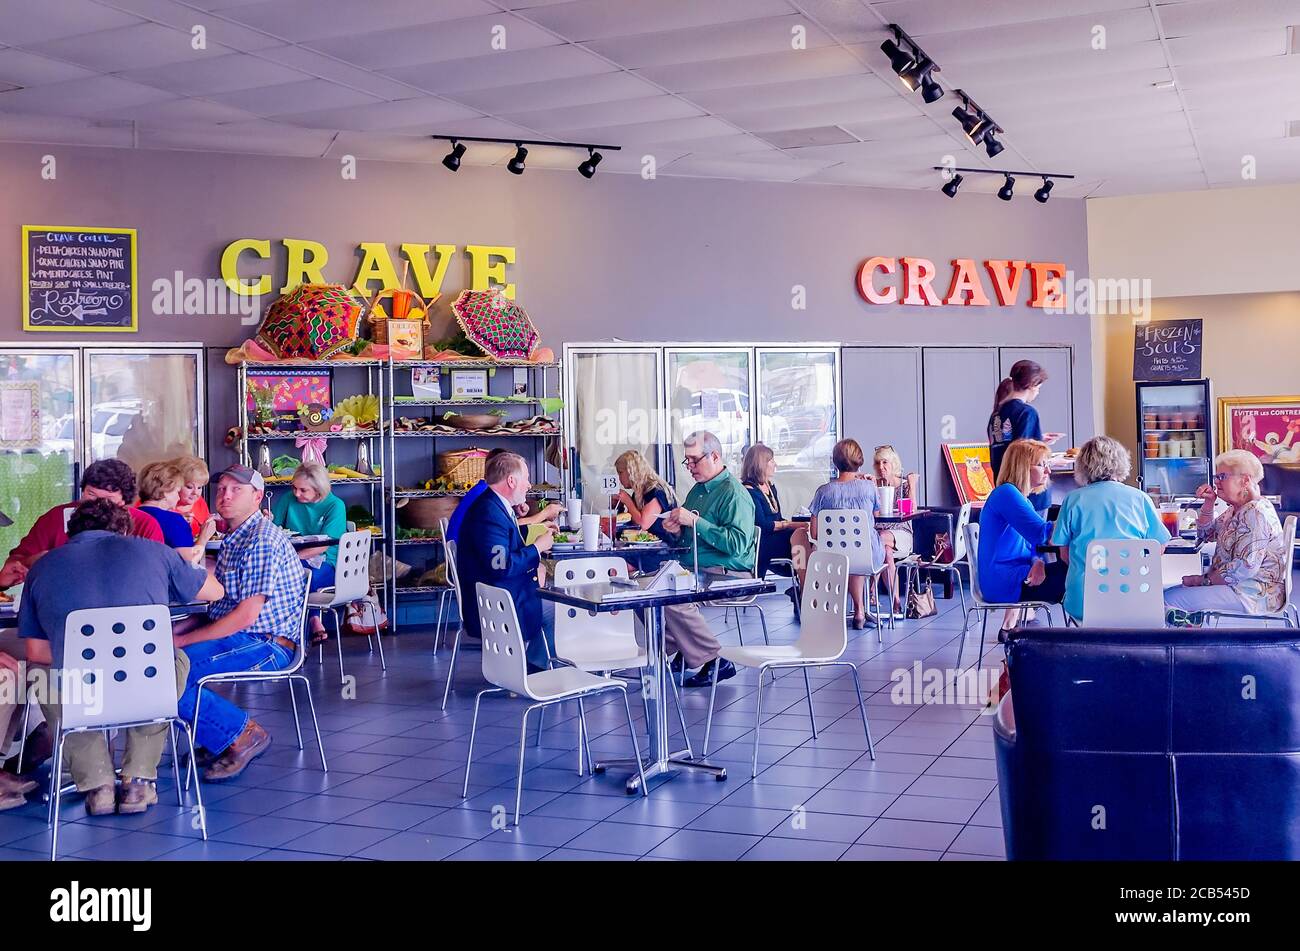 People eat lunch at Crave Bistro/Cupcakery, Aug. 12, 2016, in Cleveland, Mississippi. The bakery specializes in giant gourmet cupcakes. Stock Photo